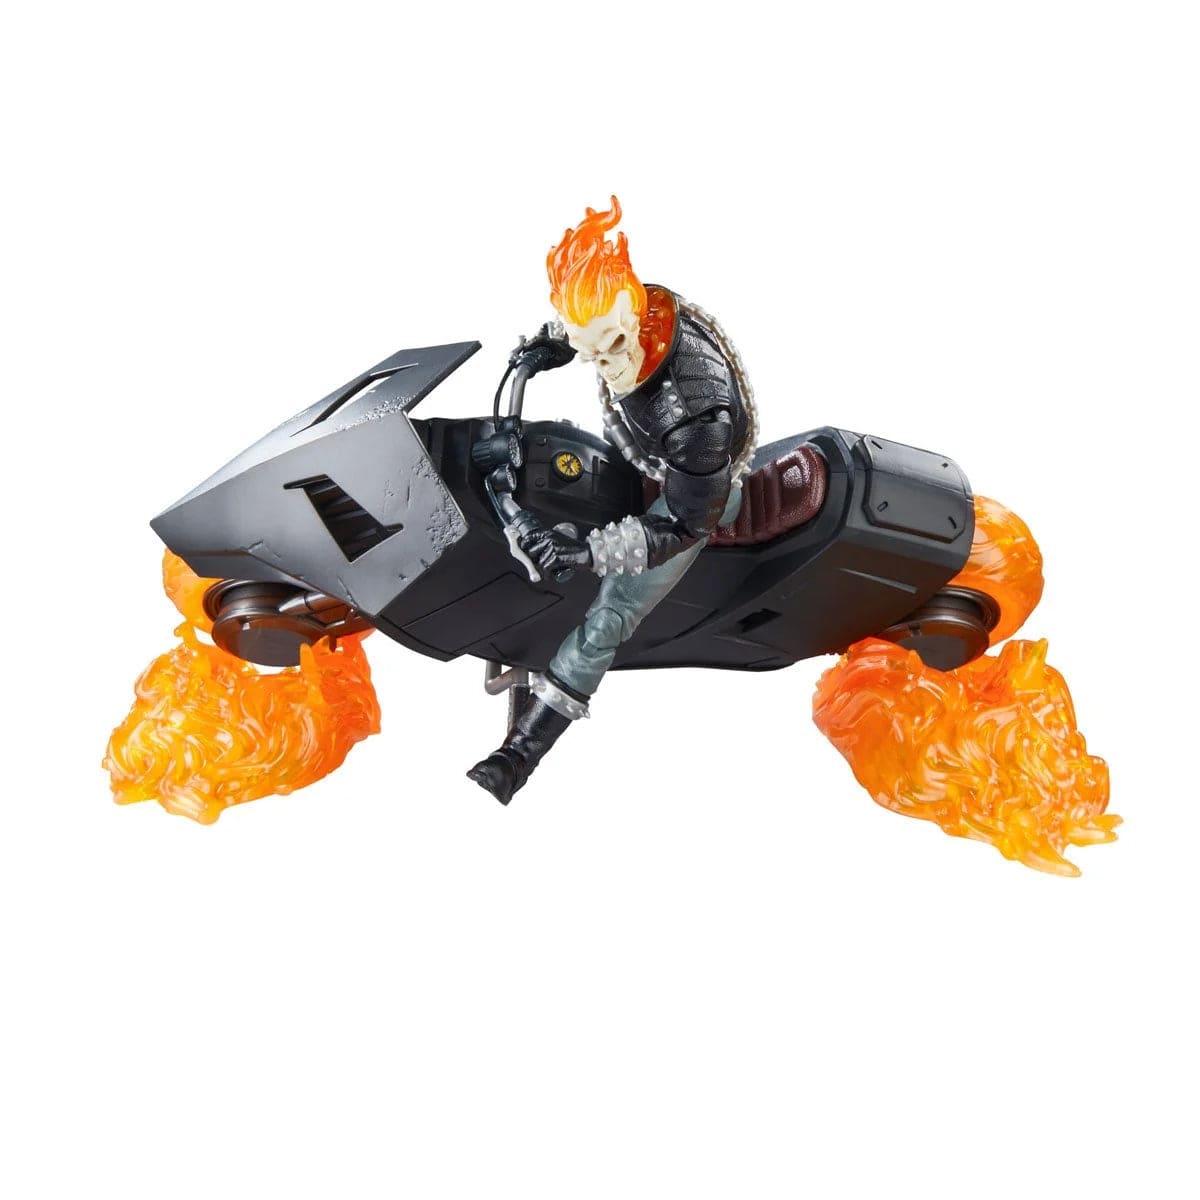 Marvel-Legends-Series-Ghost-Rider-_Danny-Ketch_-with-Motorcycle-Action-Figure-Pose-Bike-Slide